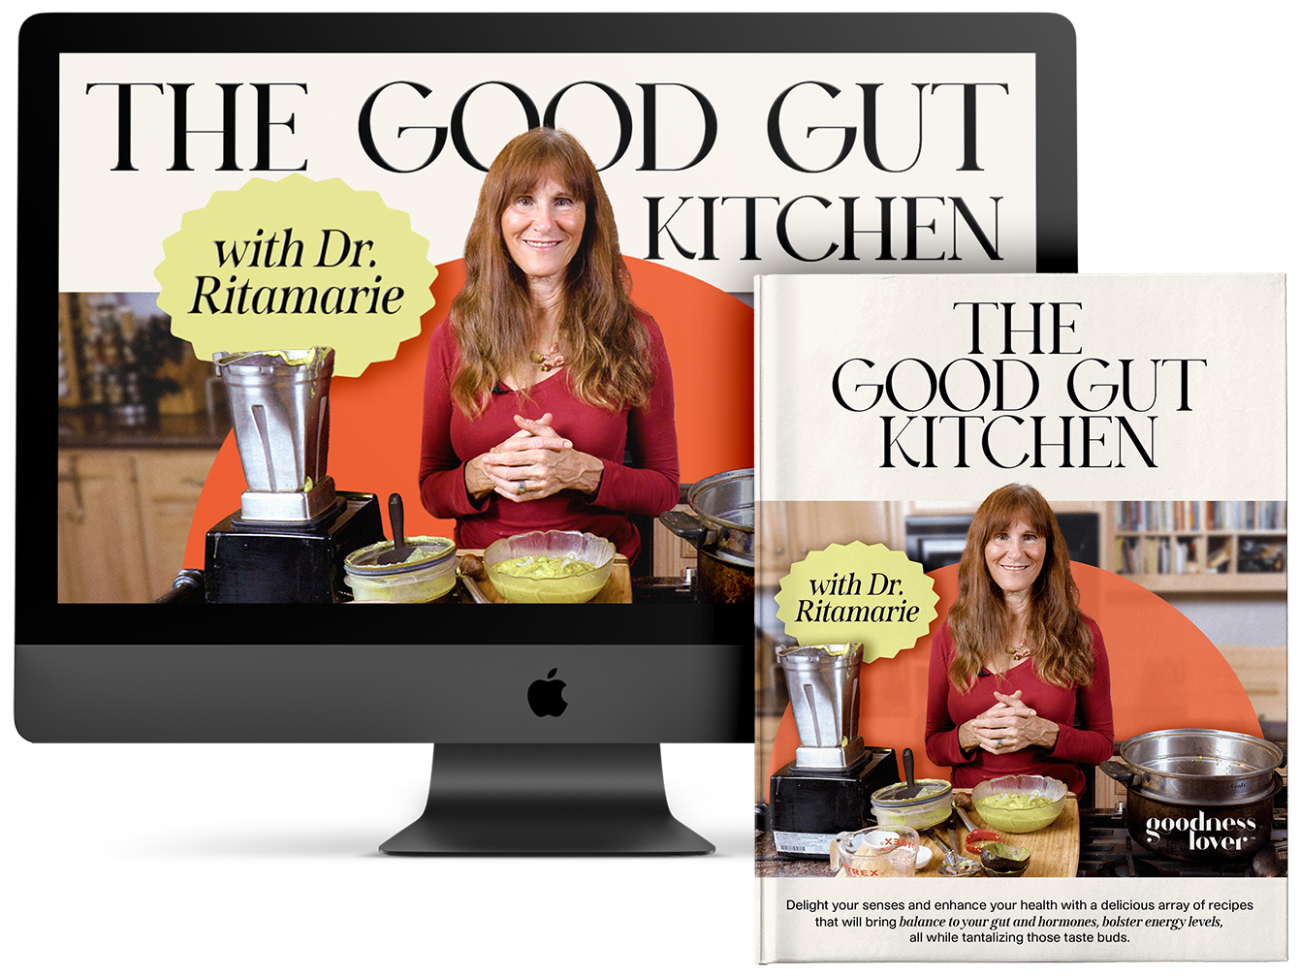 The Good Gut Kitchen with Dr. Ritamarie